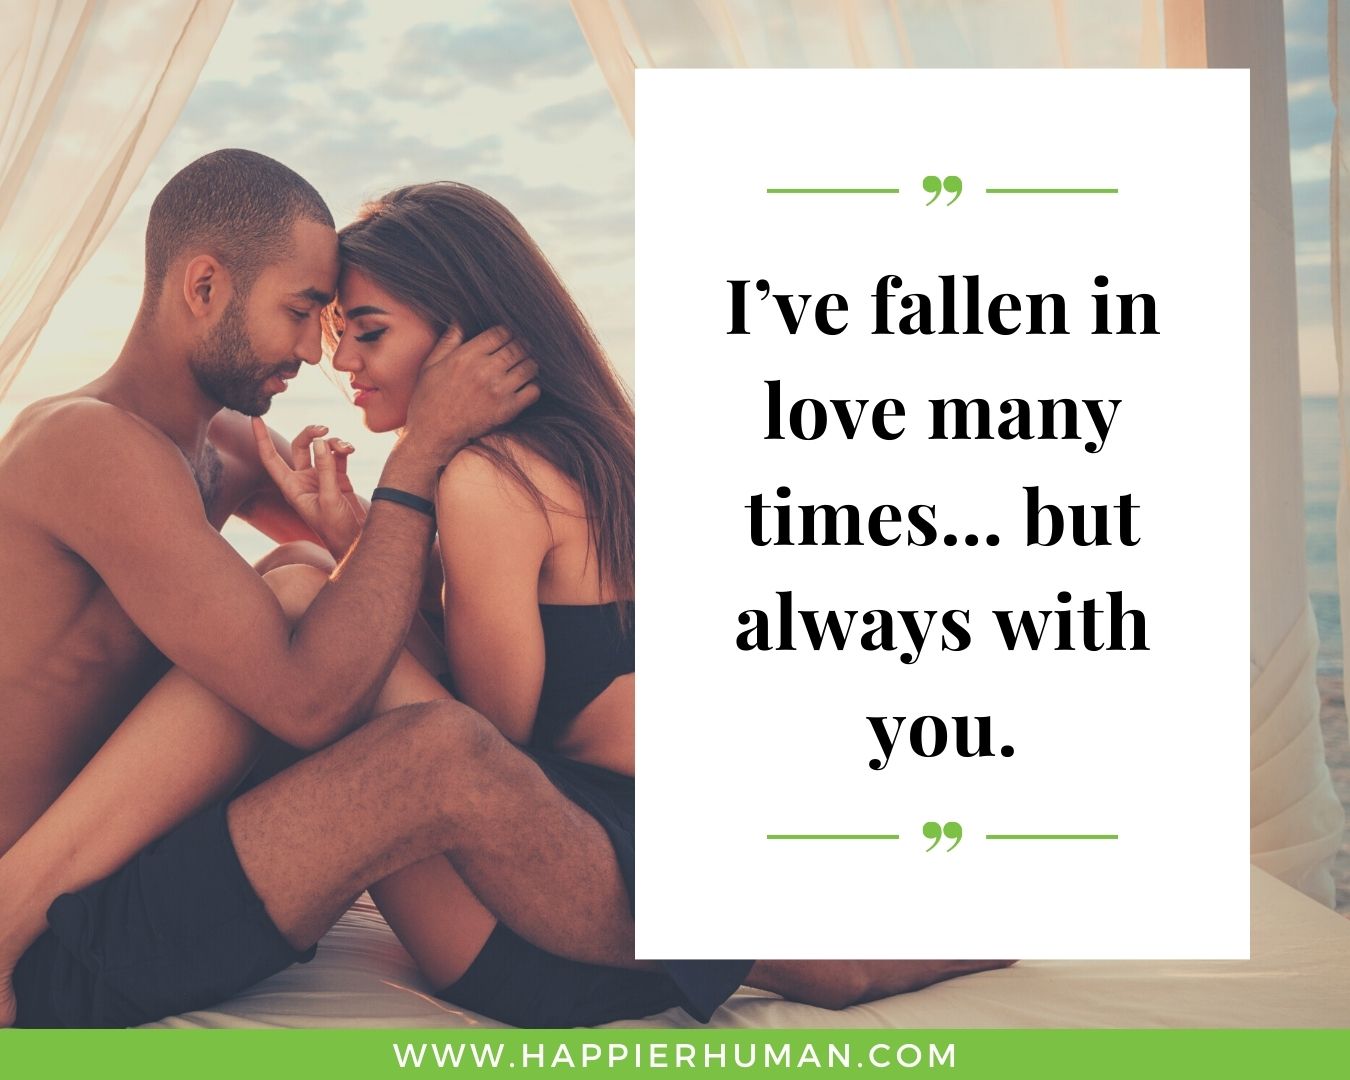 Relationship love quotes for her - “I’ve fallen in love many times… but always with you.”